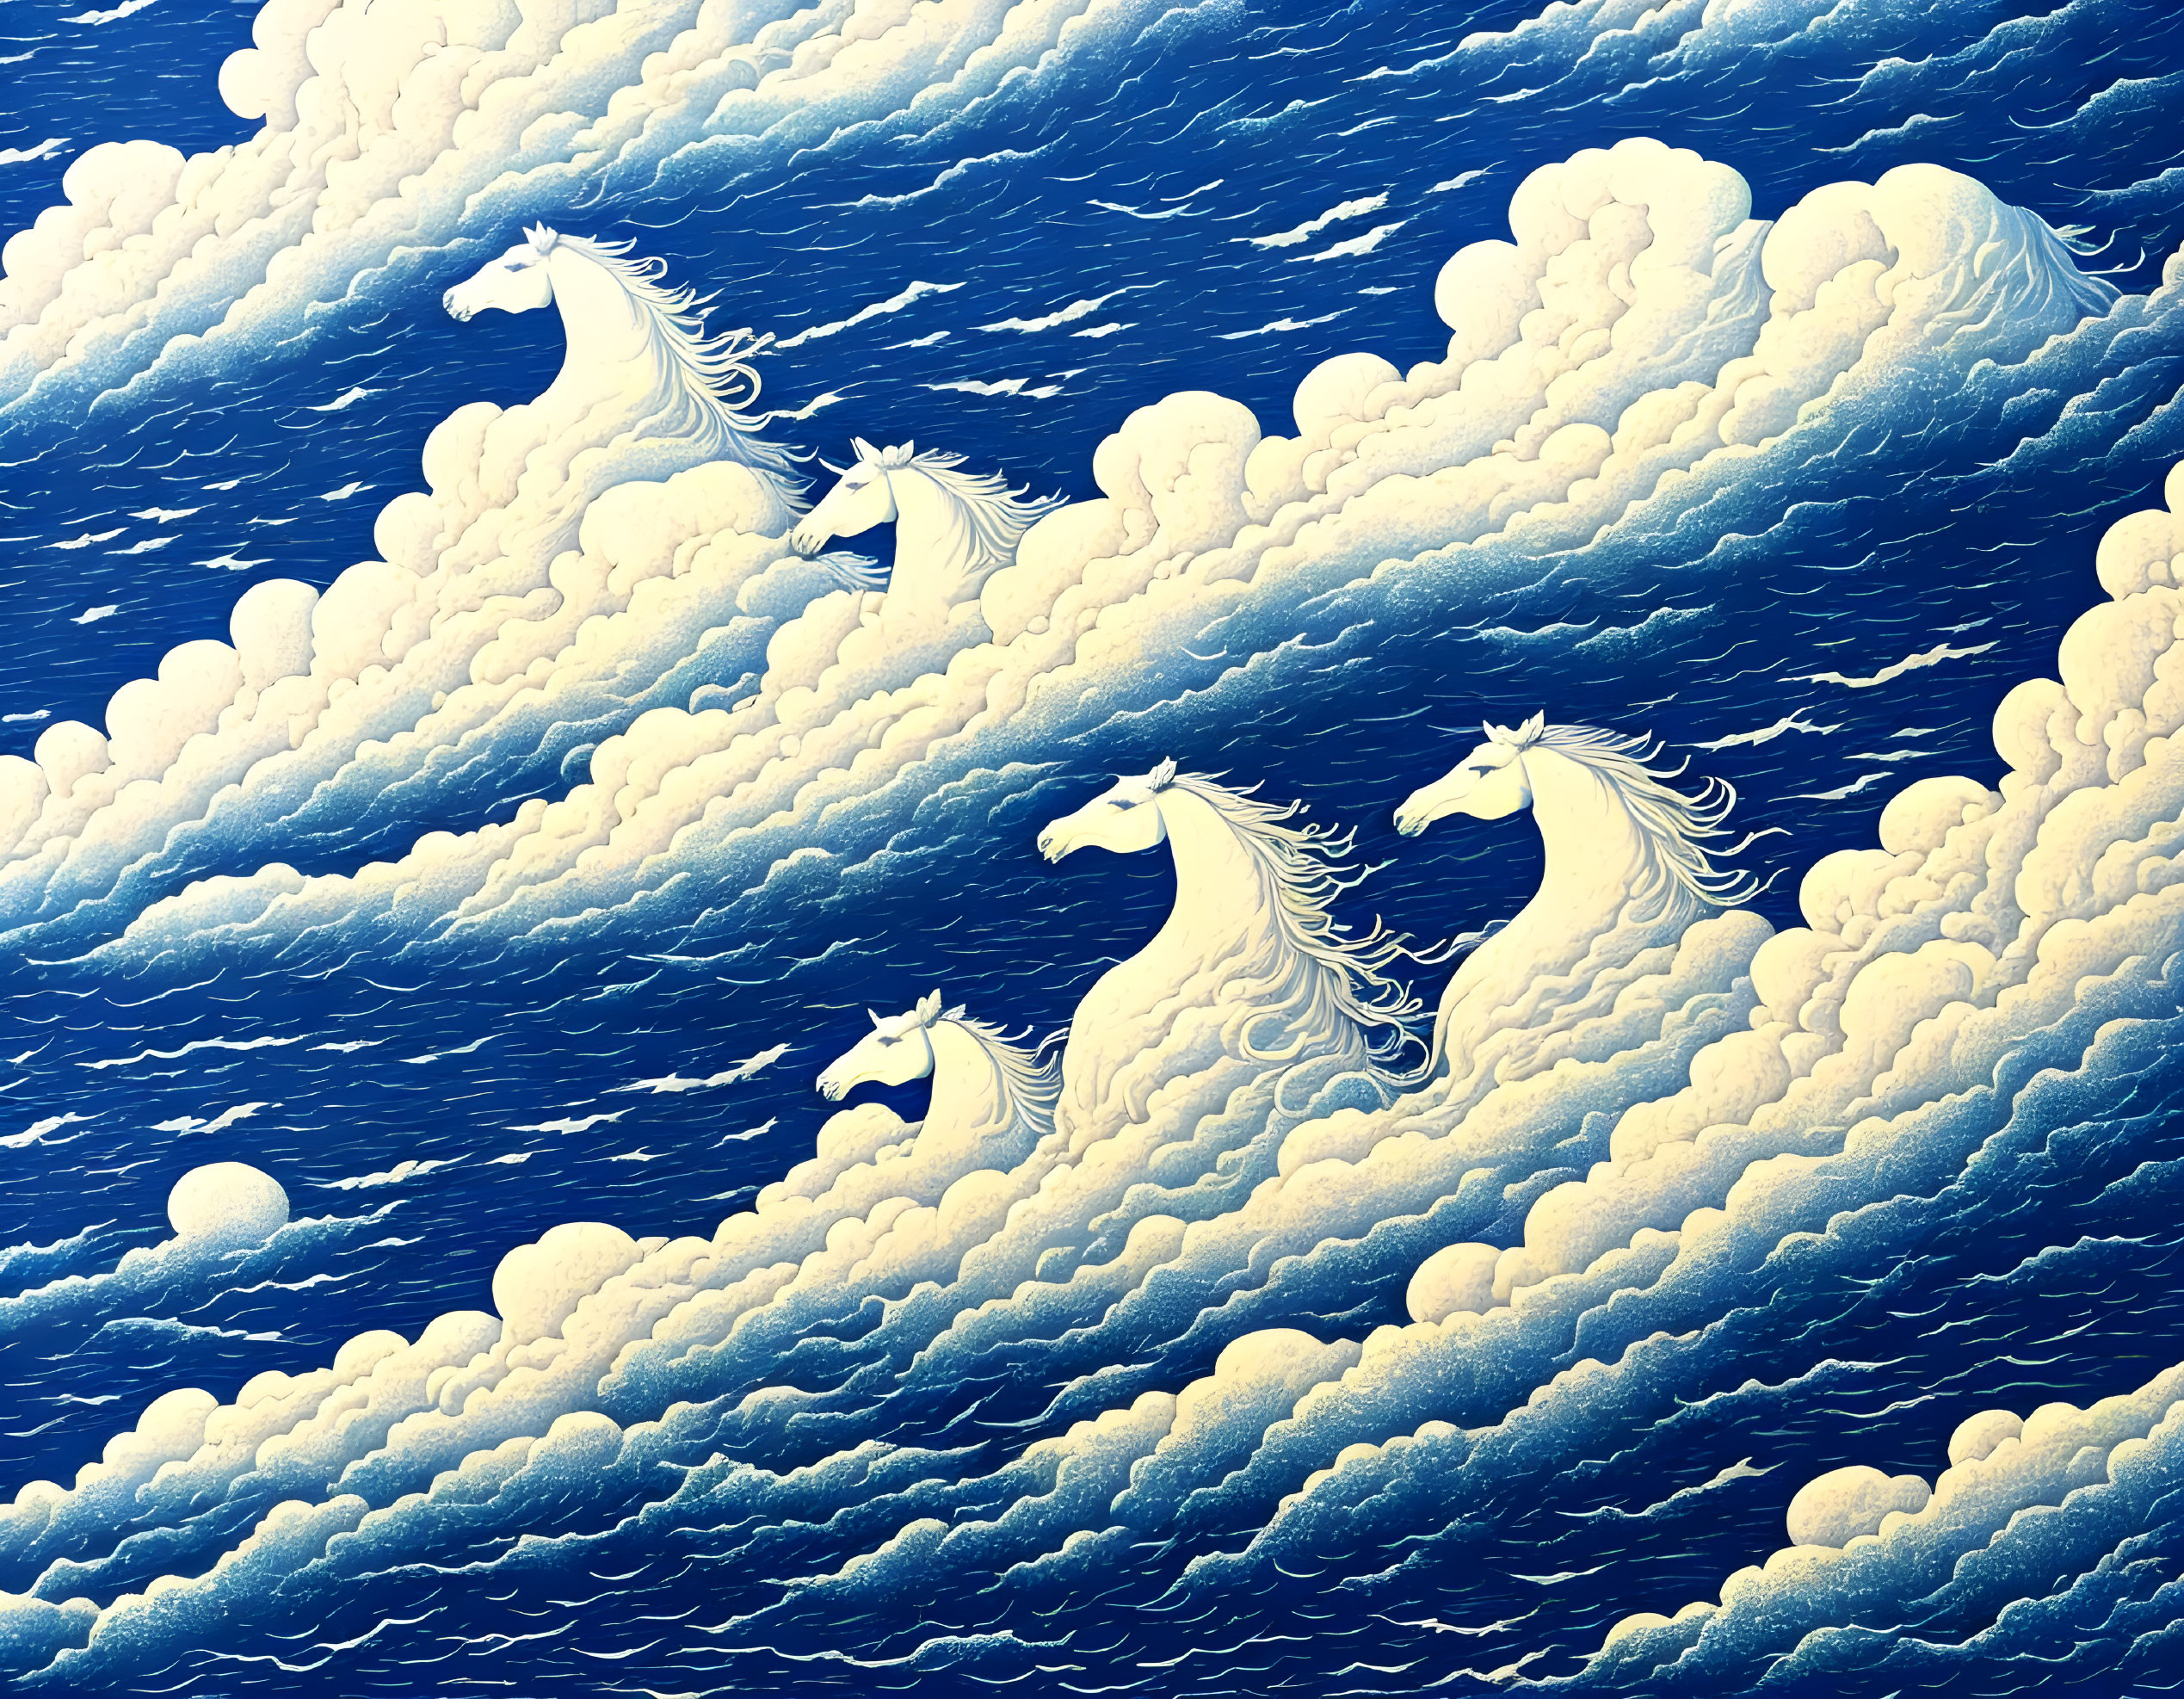 White horses with flowing manes in choppy ocean waves under a patterned sky